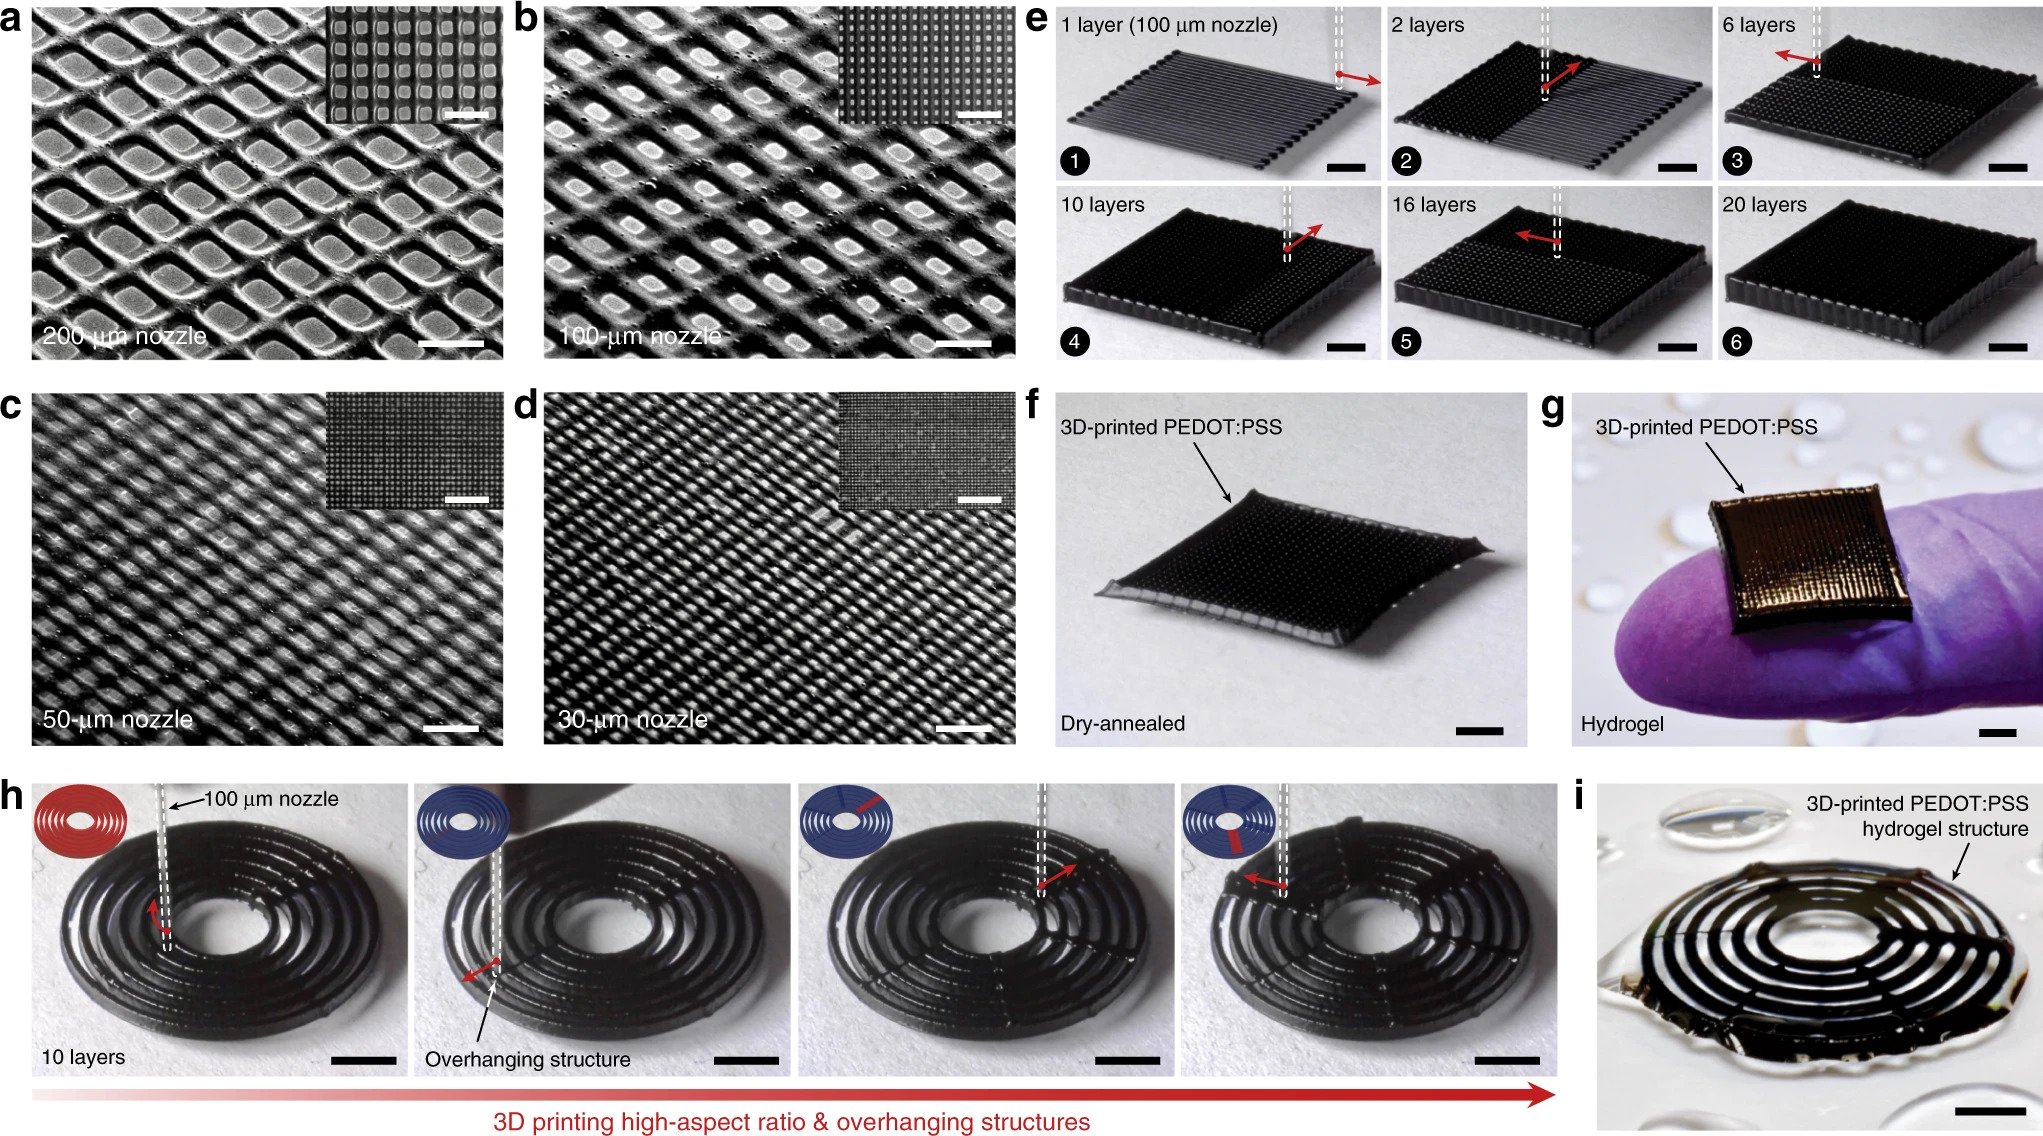 SEM images of 3D-printed conducting polymer meshes by 200-µm. Image via Nature Communications.